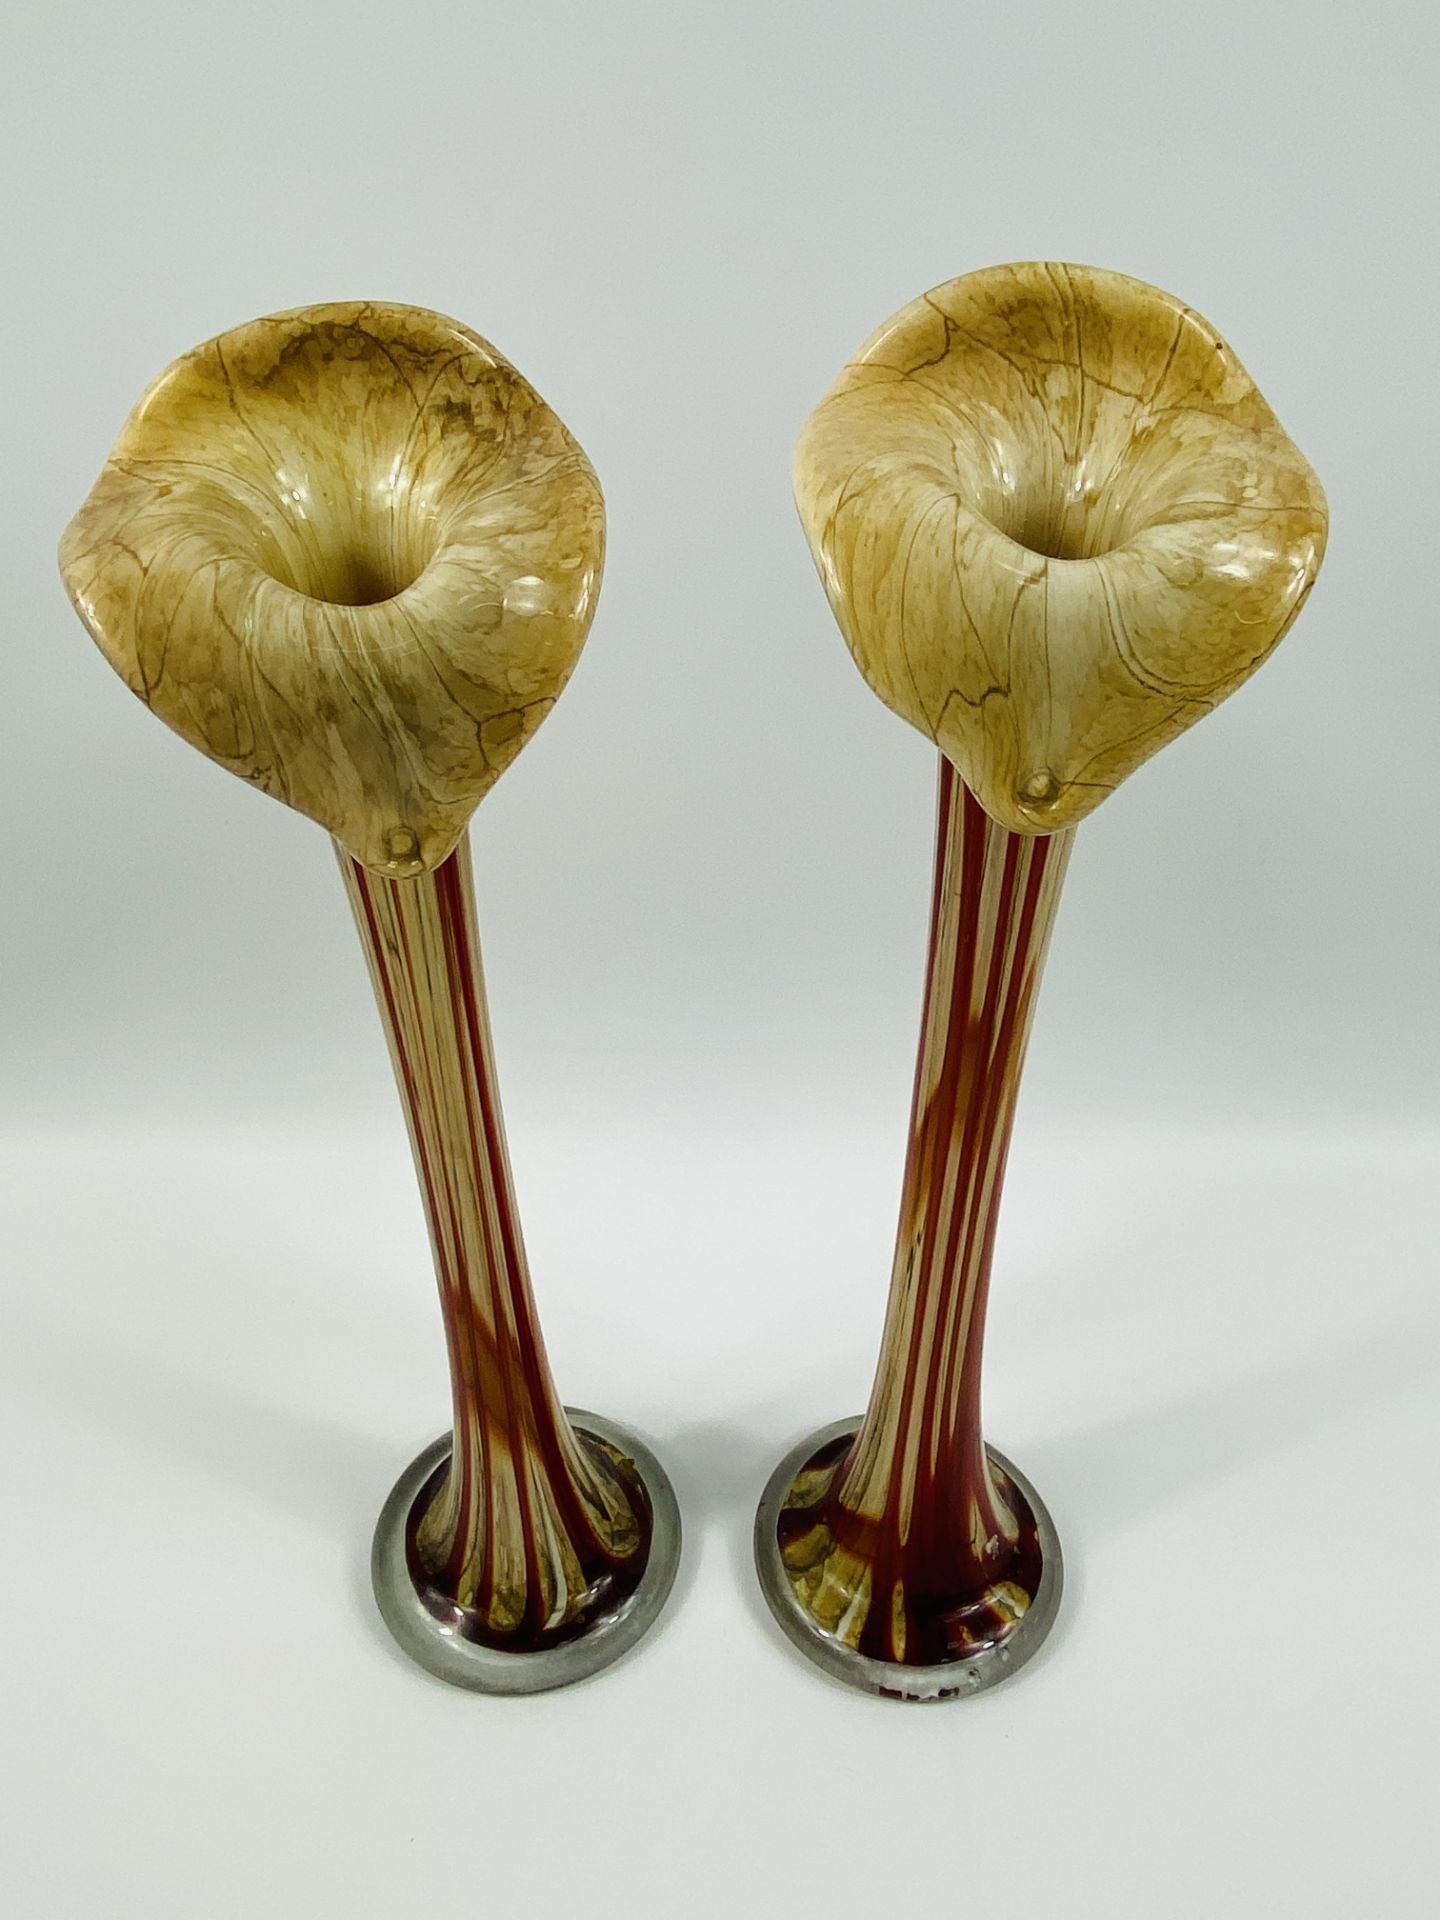 Pair of Jack in the pulpit glass vases - Image 2 of 3